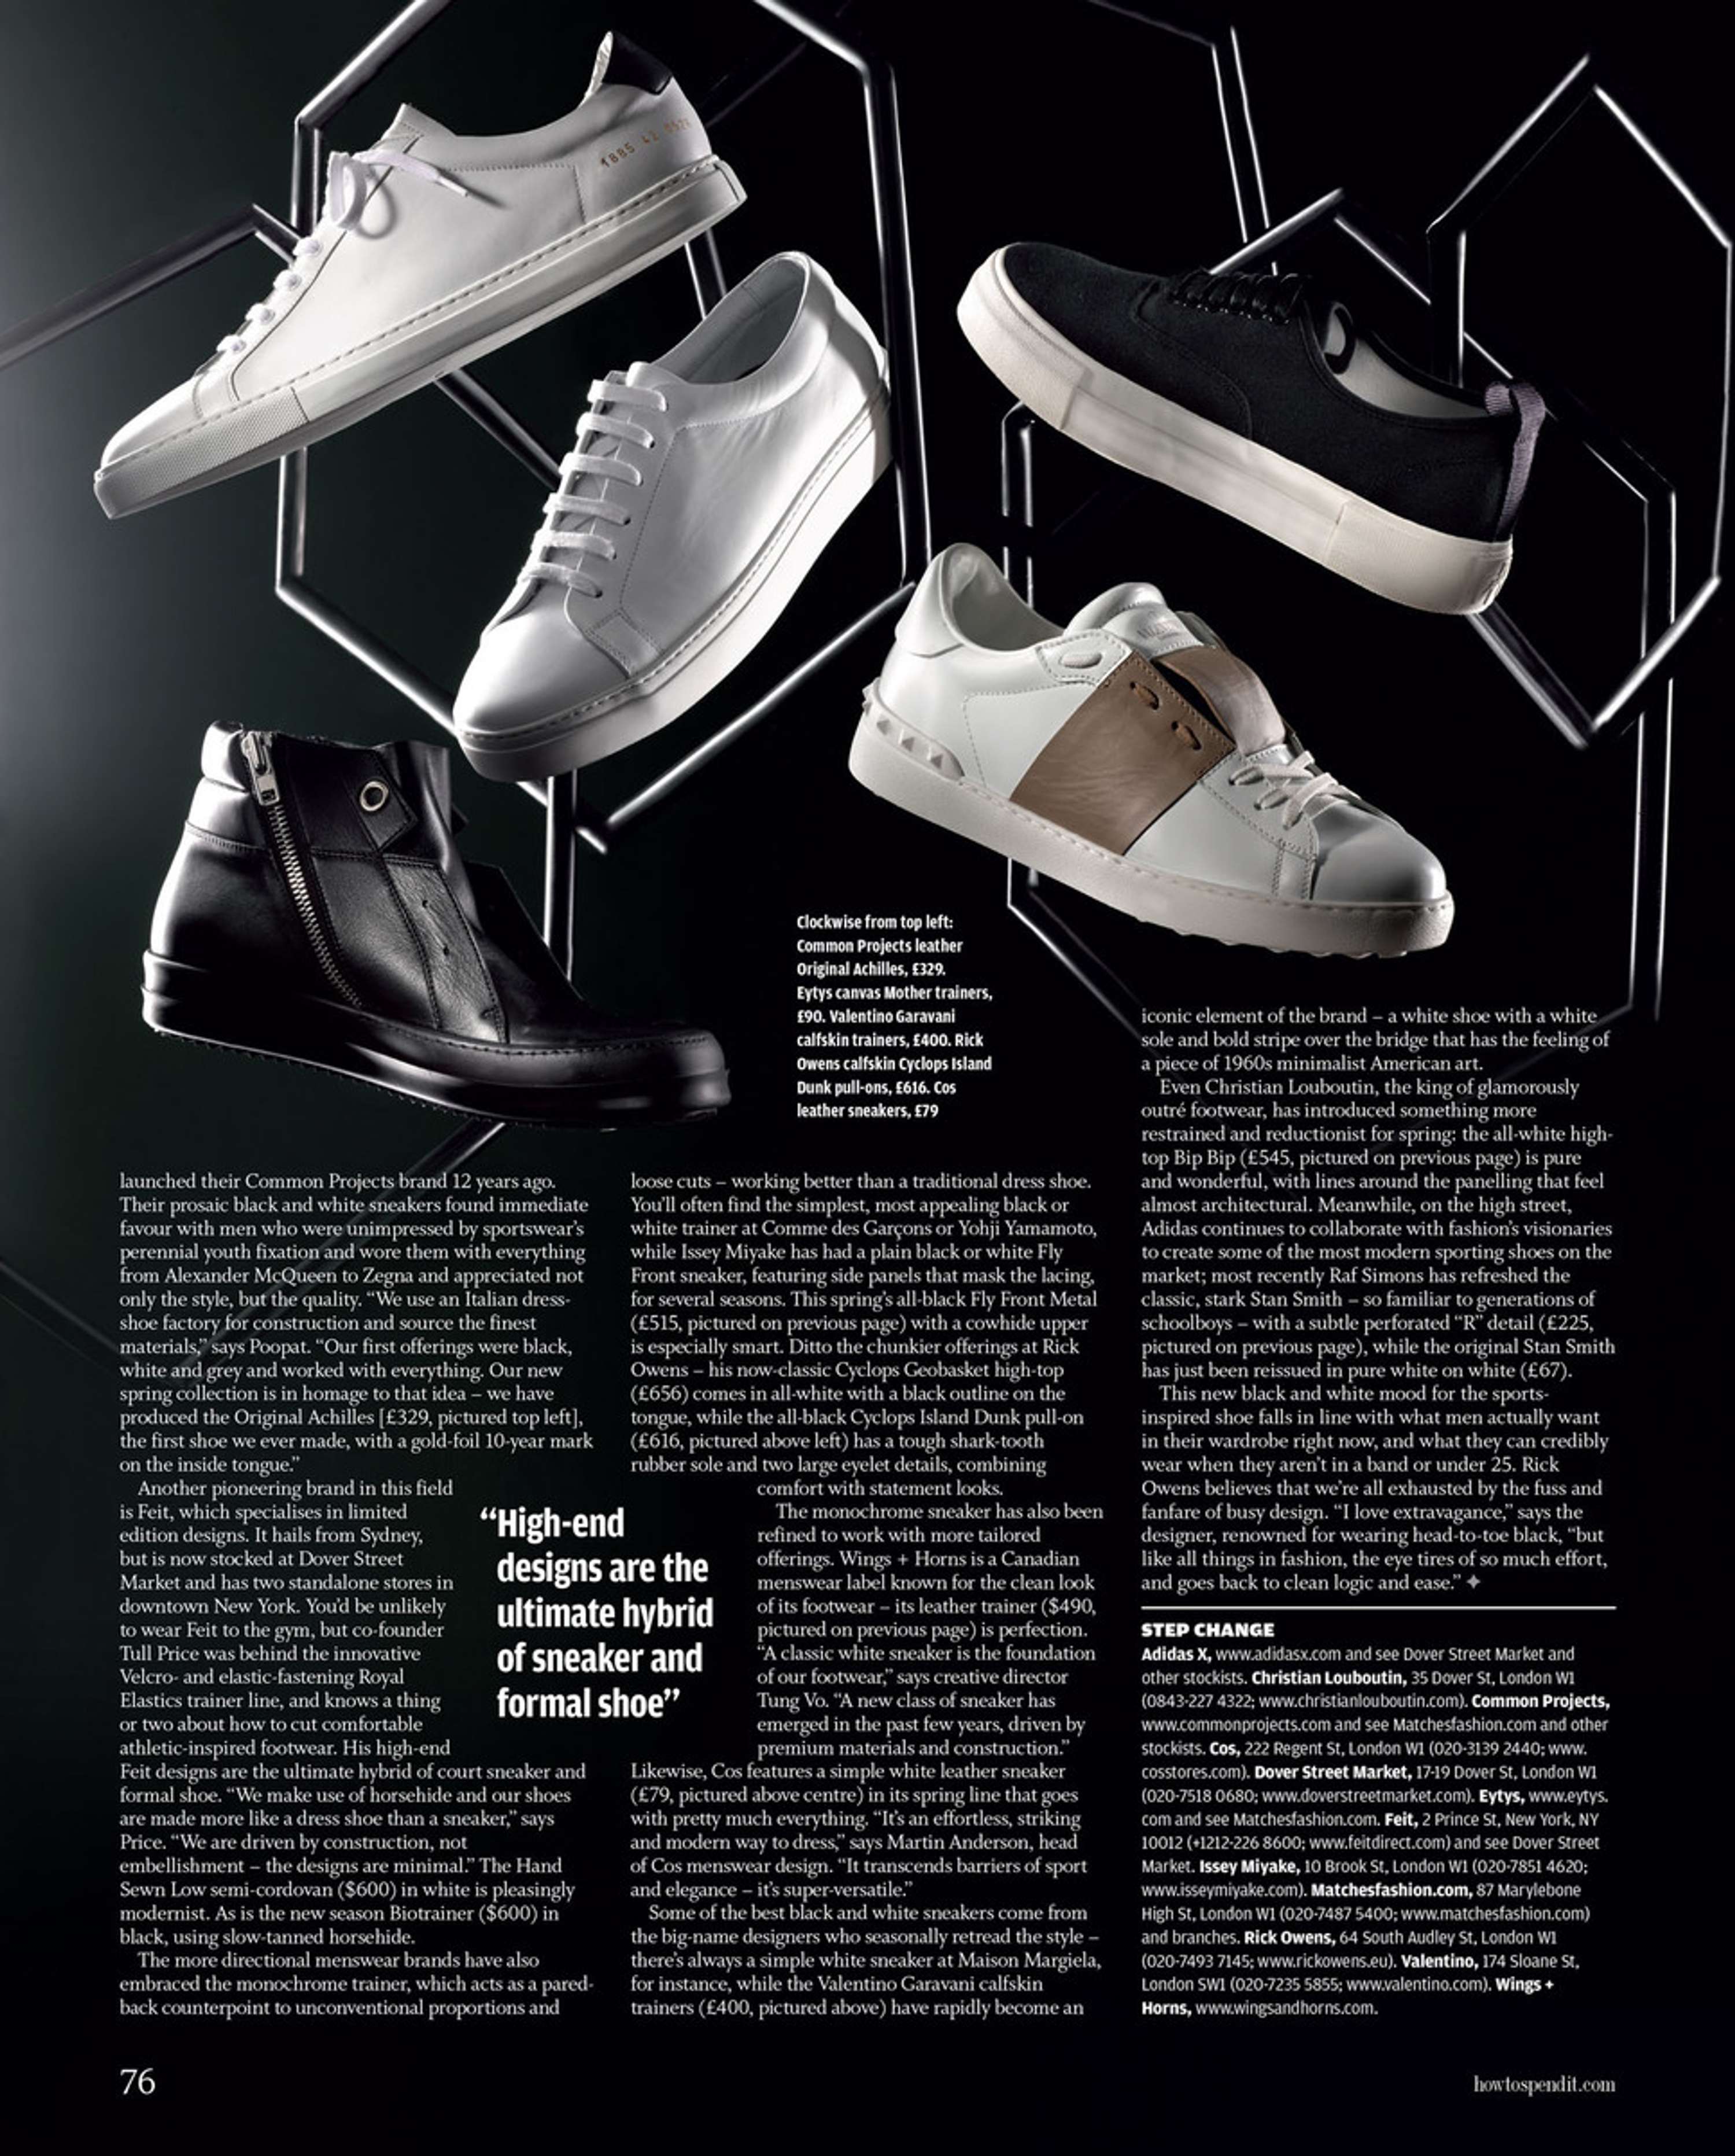 ISSEY MIYAKE, ADIDAS AND CHRISTIAN TRAINERS BY OMER KNAZ | The Dots